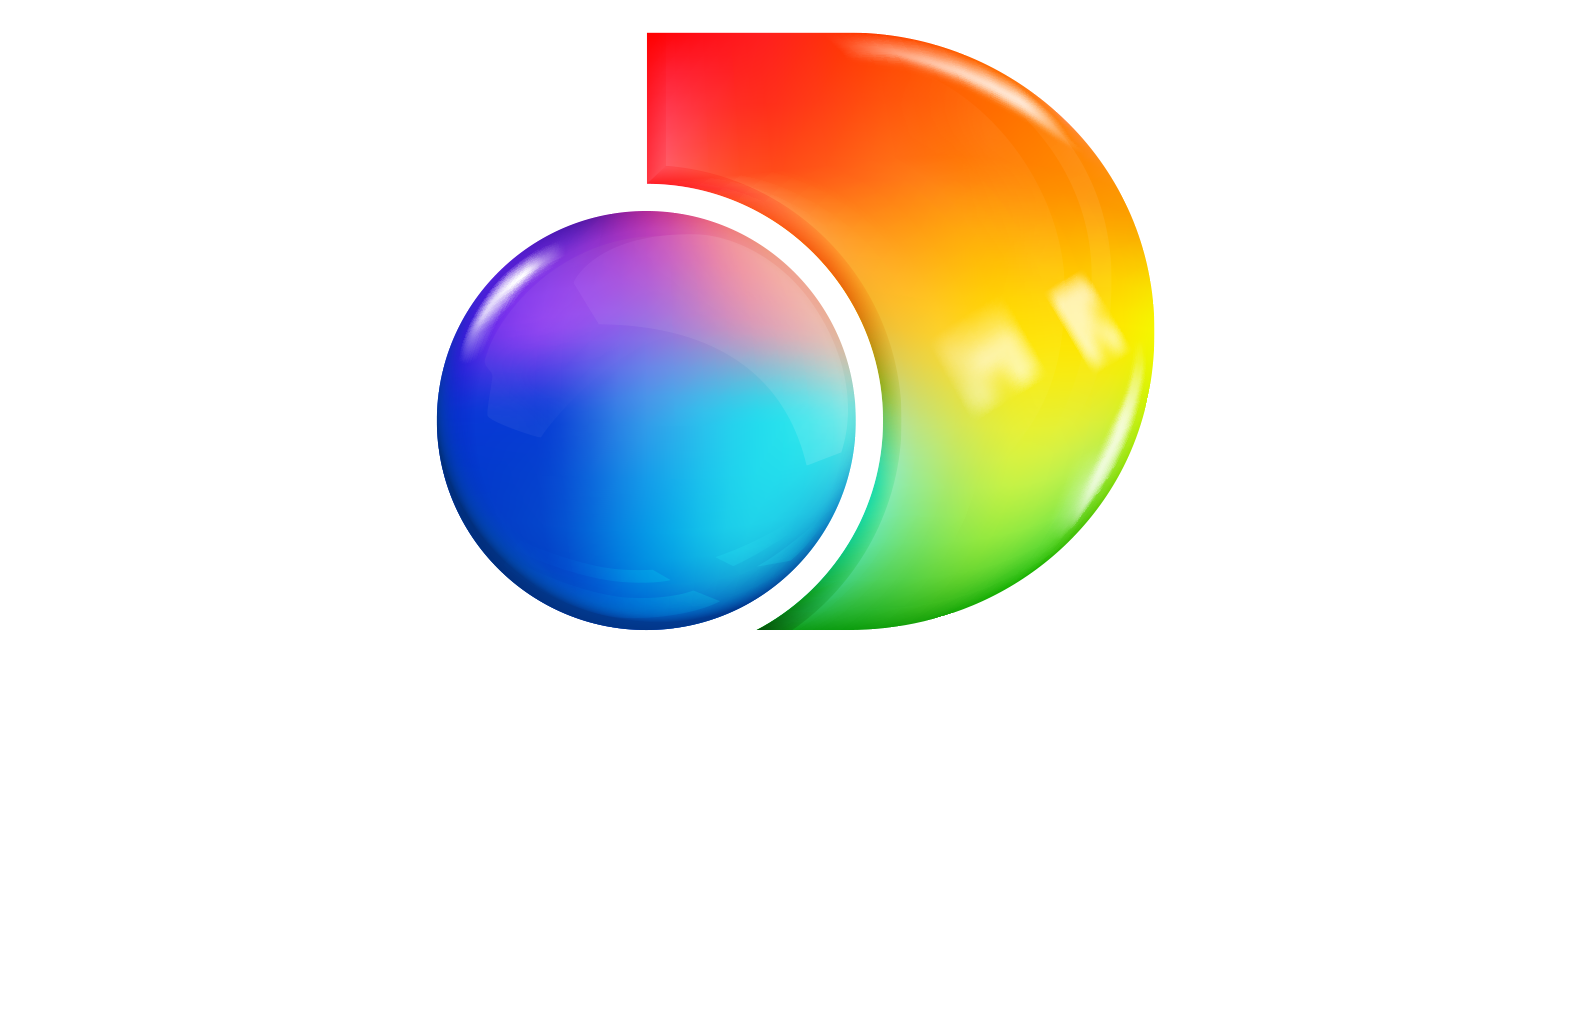 https://www.discoveryplus.com/ca/dp/imports/assets/common/img/discovery-plus-vertical-logo-f4bed283de93718ea340b031b3b4e45f.png